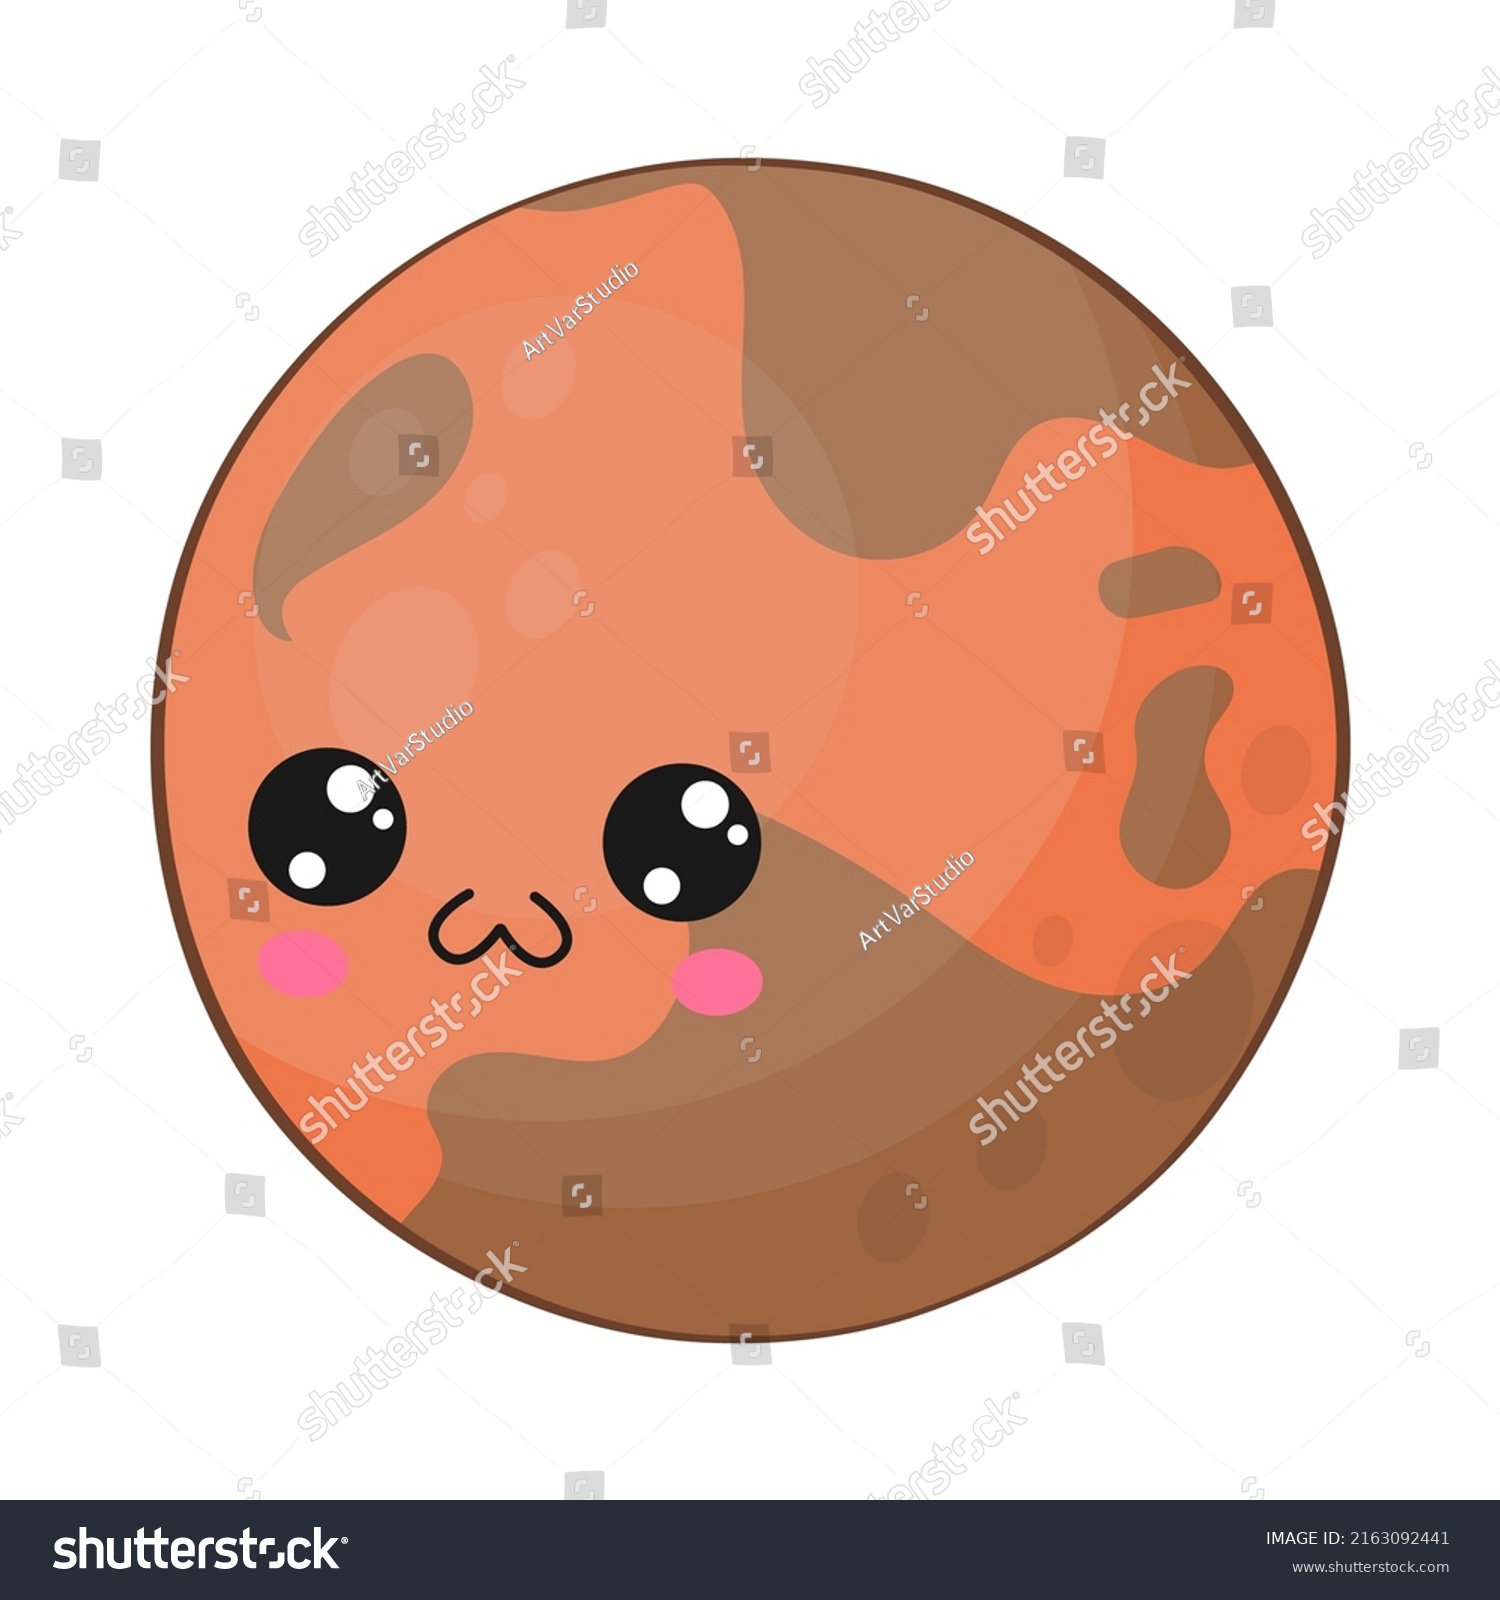 SVG of Cute kawaii planet Mars Vector illustration of a planet. Picture of planet for kids, baby book, fairy tales, covers, baby shower invitation, textile t-shirt.
 svg